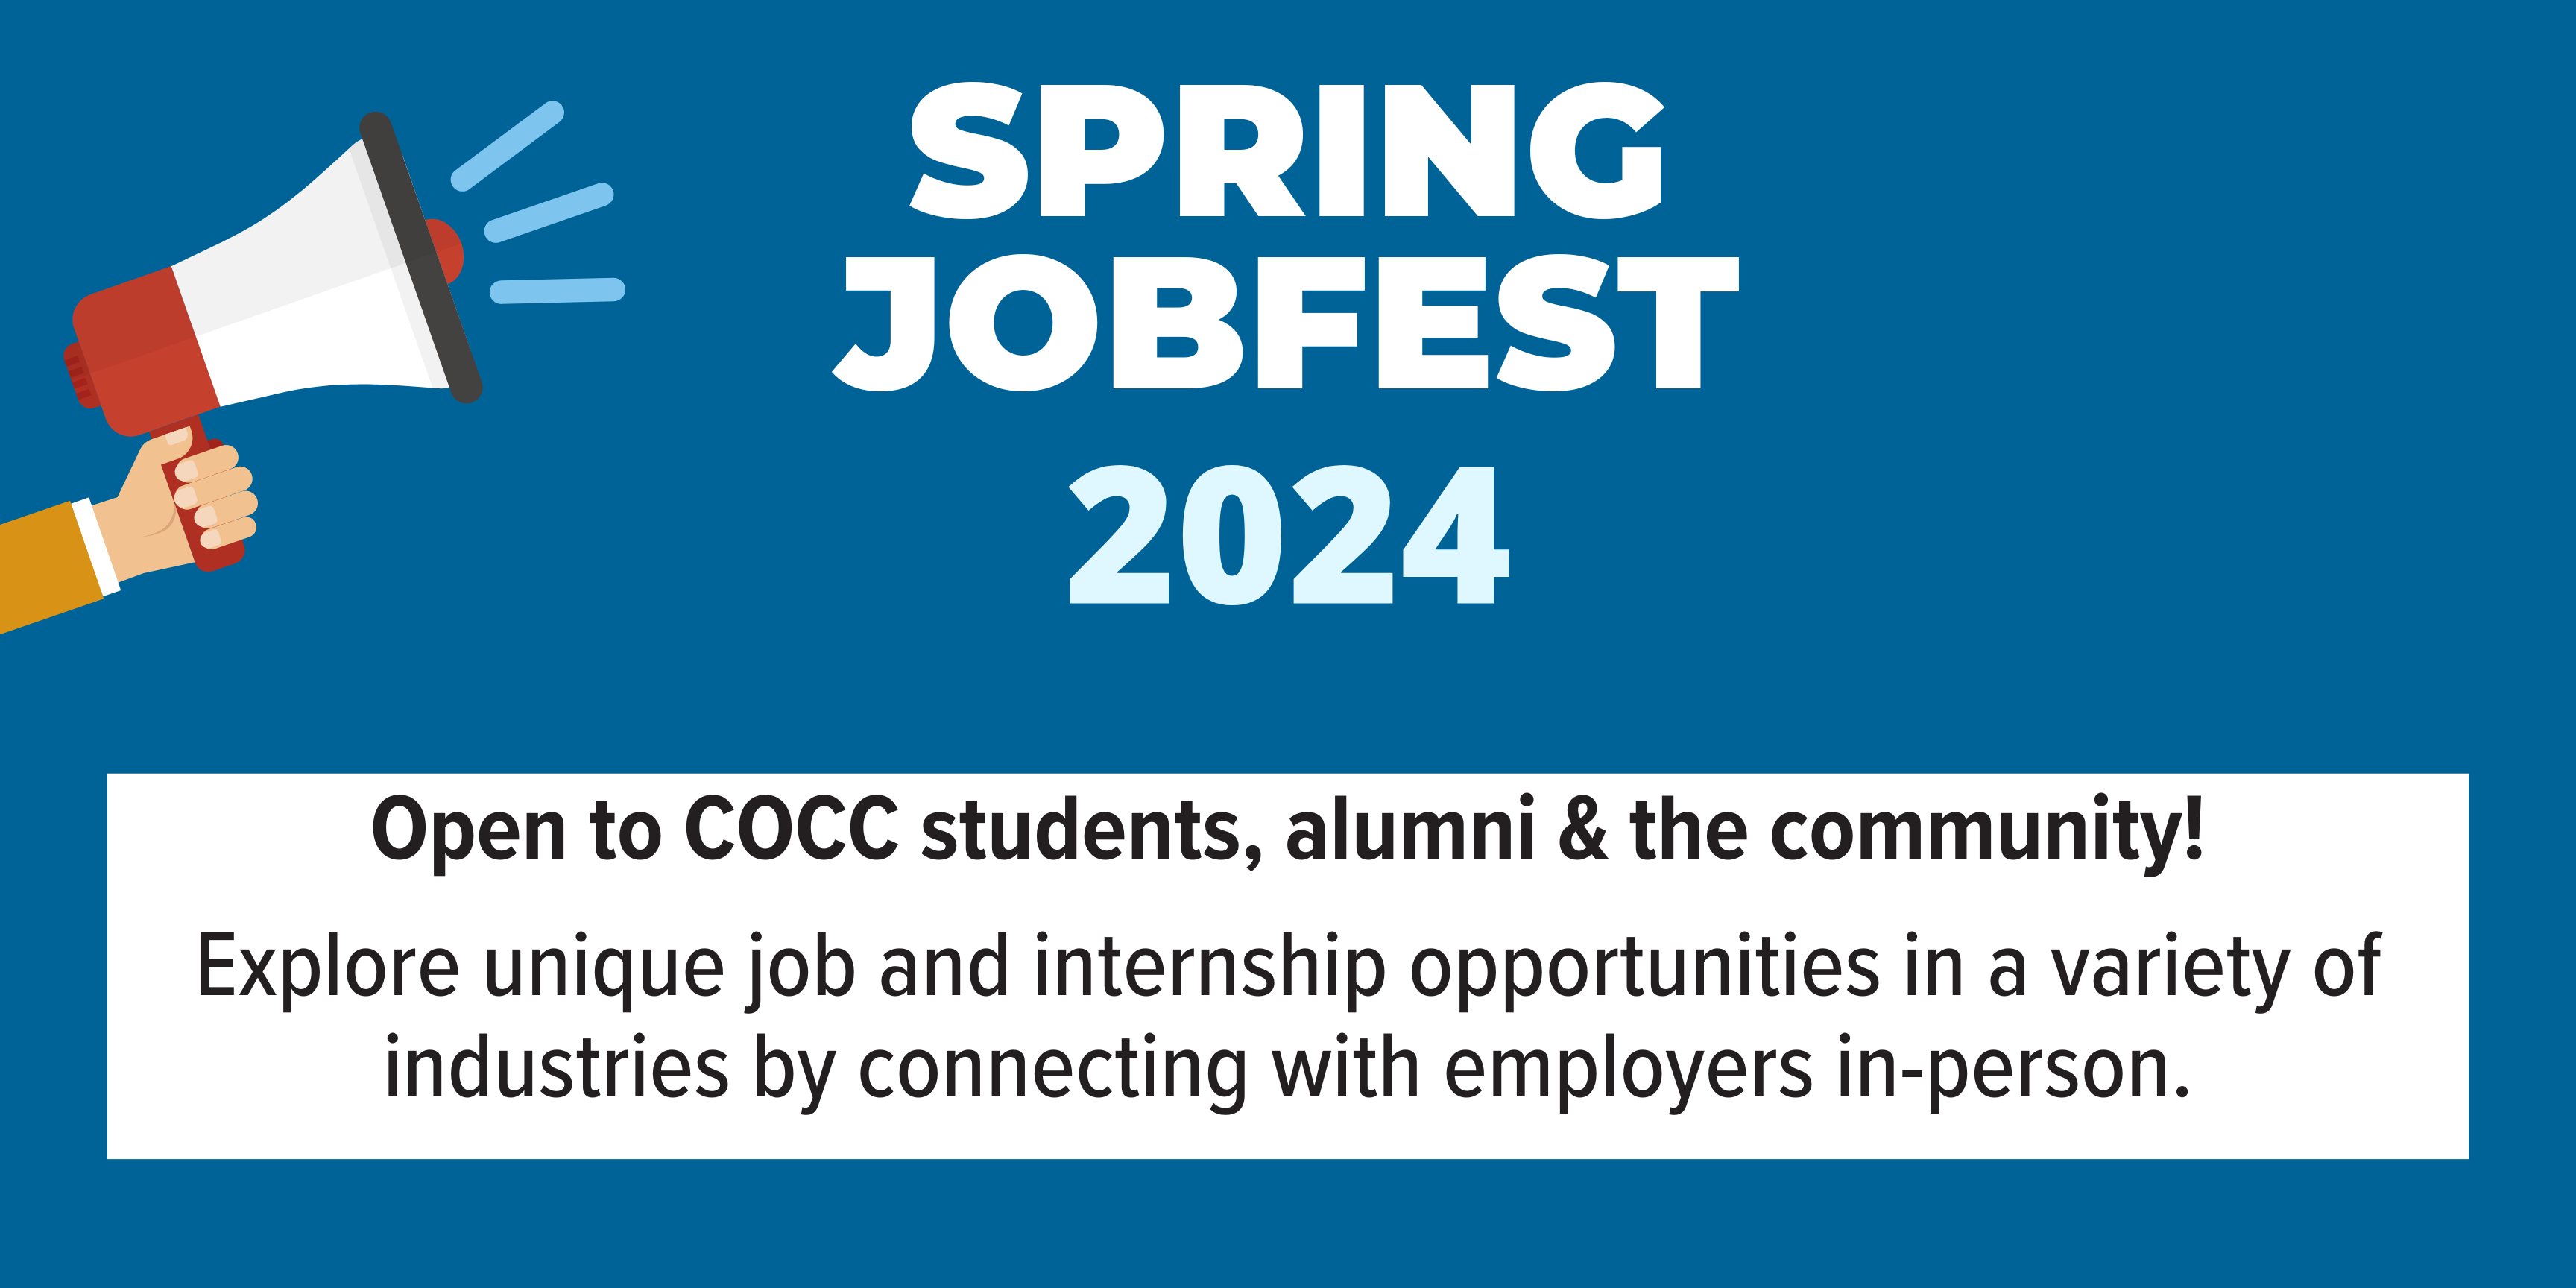 Spring 2024 JobFest Header. Open to COCC students, alumni & the community!Explore unique job and internship opportunities in a variety of industries by connecting with employers in-person.